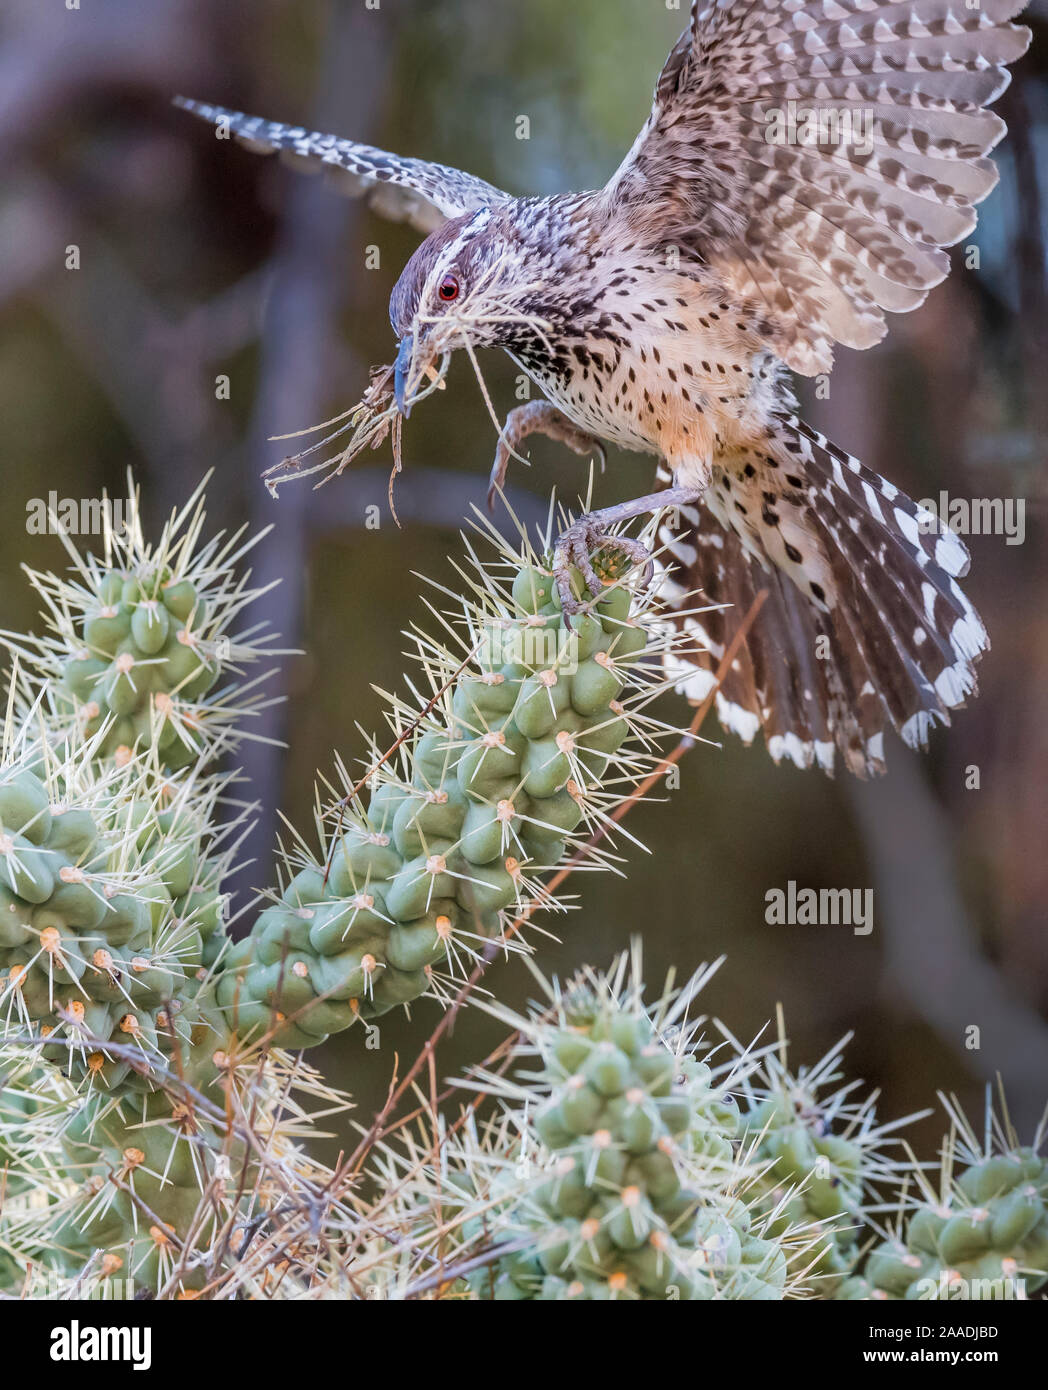 Cactus wren (Campylorhynchus brunneicapillus) carrying nest-building material in its beak for its nest amongst the sharp spines of a Chain cholla cactus (Cylindropuntia fulgida), Sonoran Desert near Tucson, Arizona, USA. July. Stock Photo